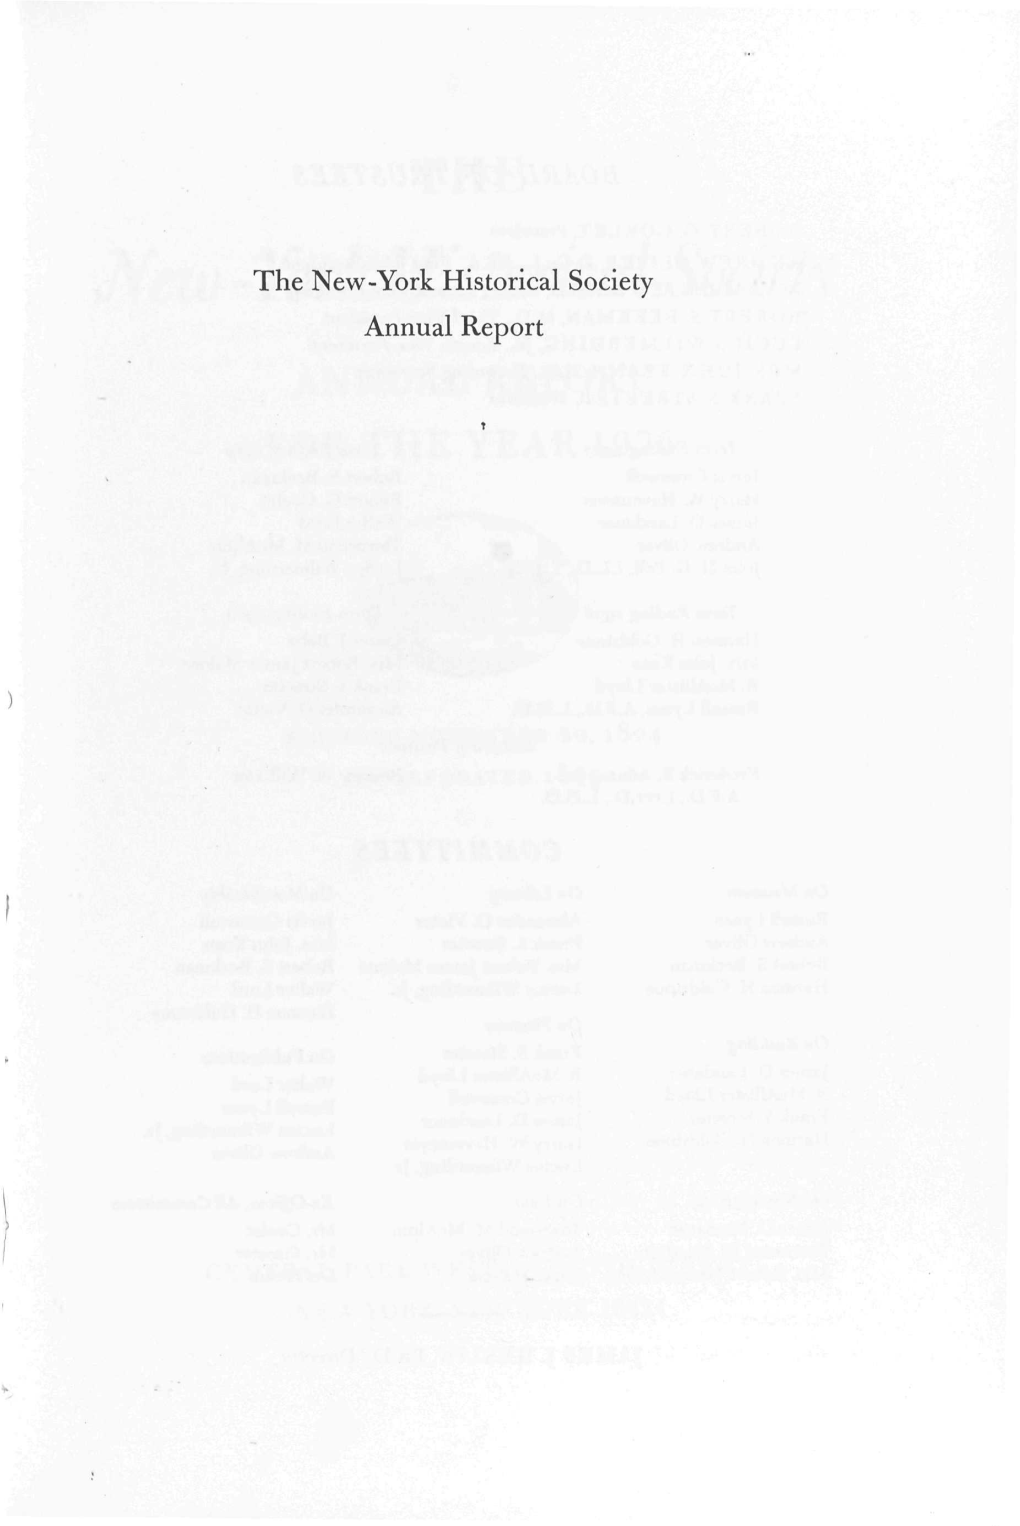 The New-York Historical Society Annual Report BOARD of TRUSTEES